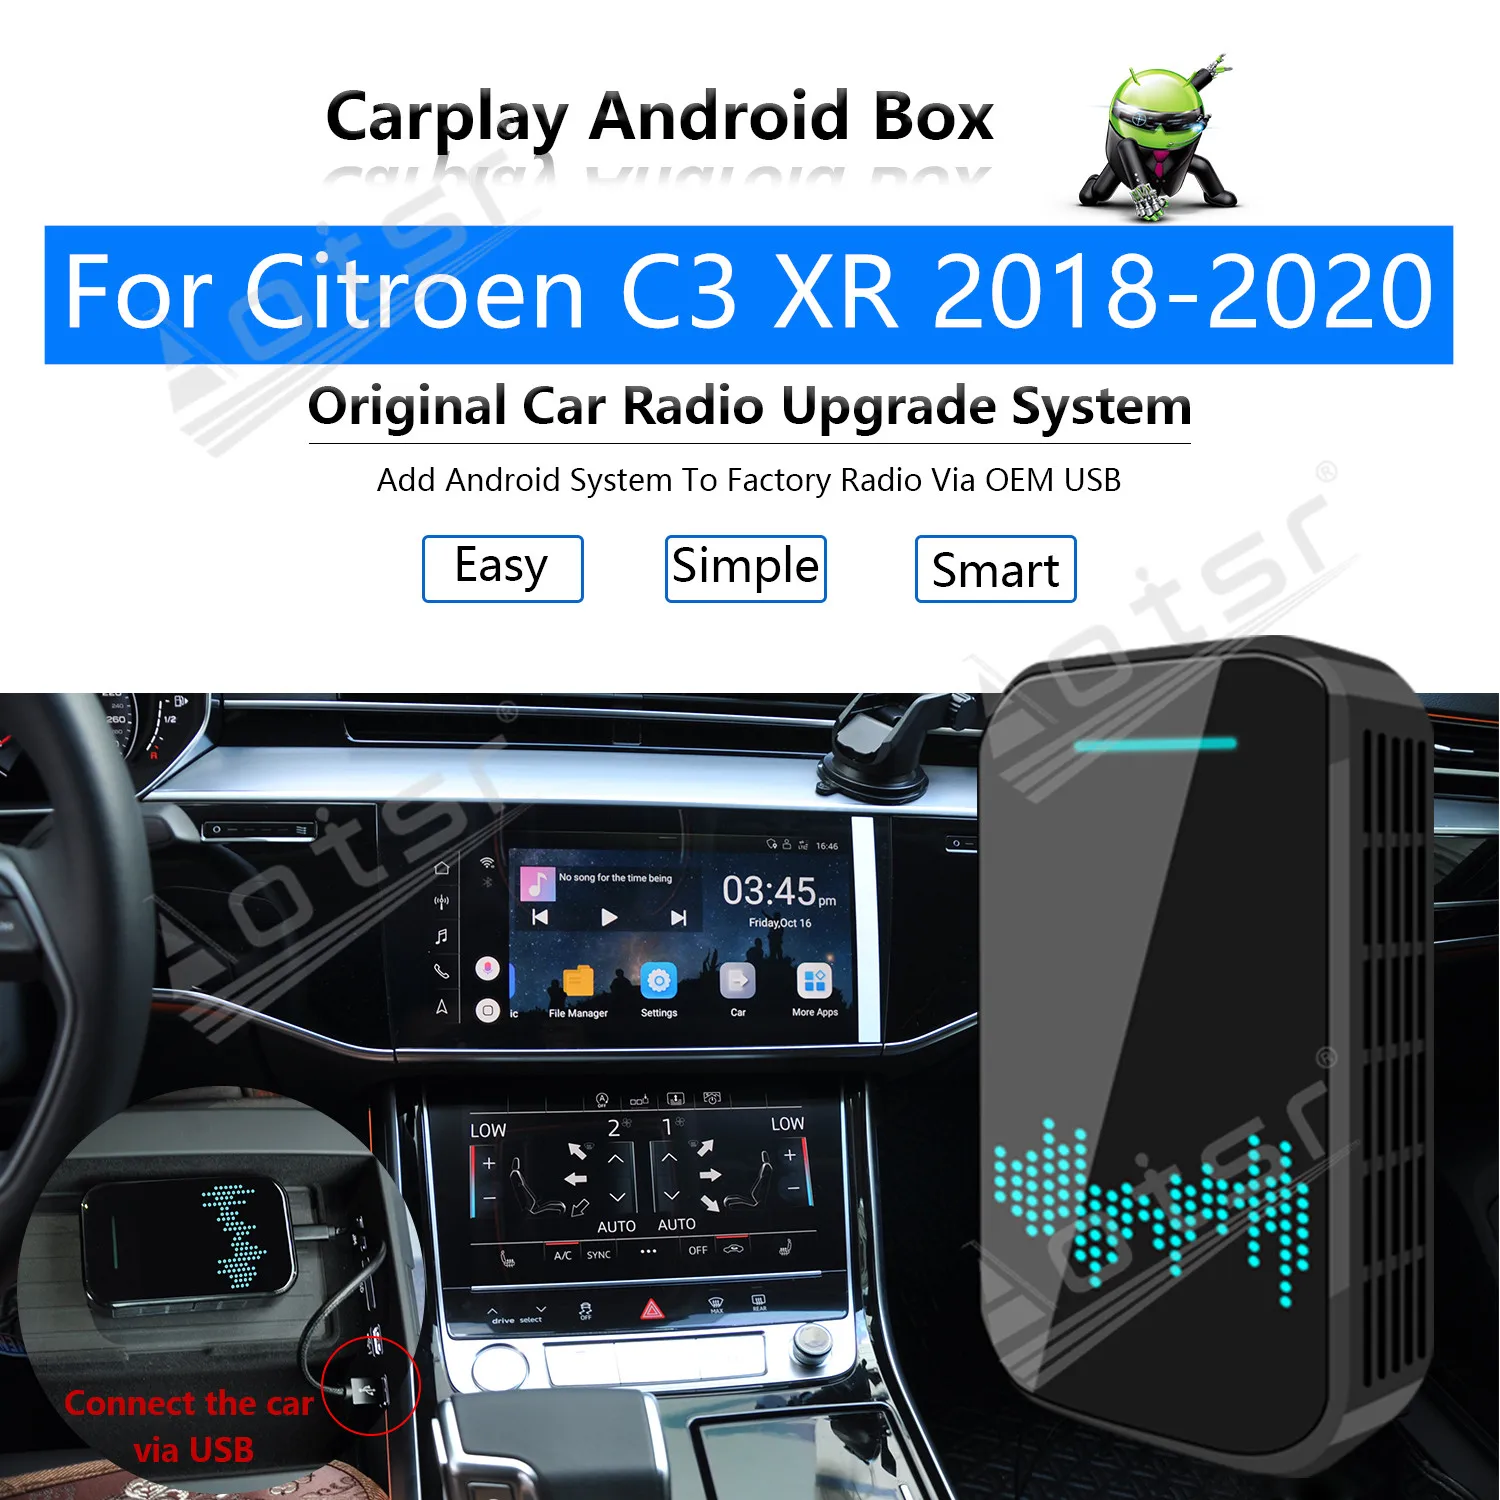 

32GB For Citroen C3 XR 2018 - 2020 Car Multimedia Player Android System Mirror Link GPS Map Apple Carplay Wireless Dongle Ai Box